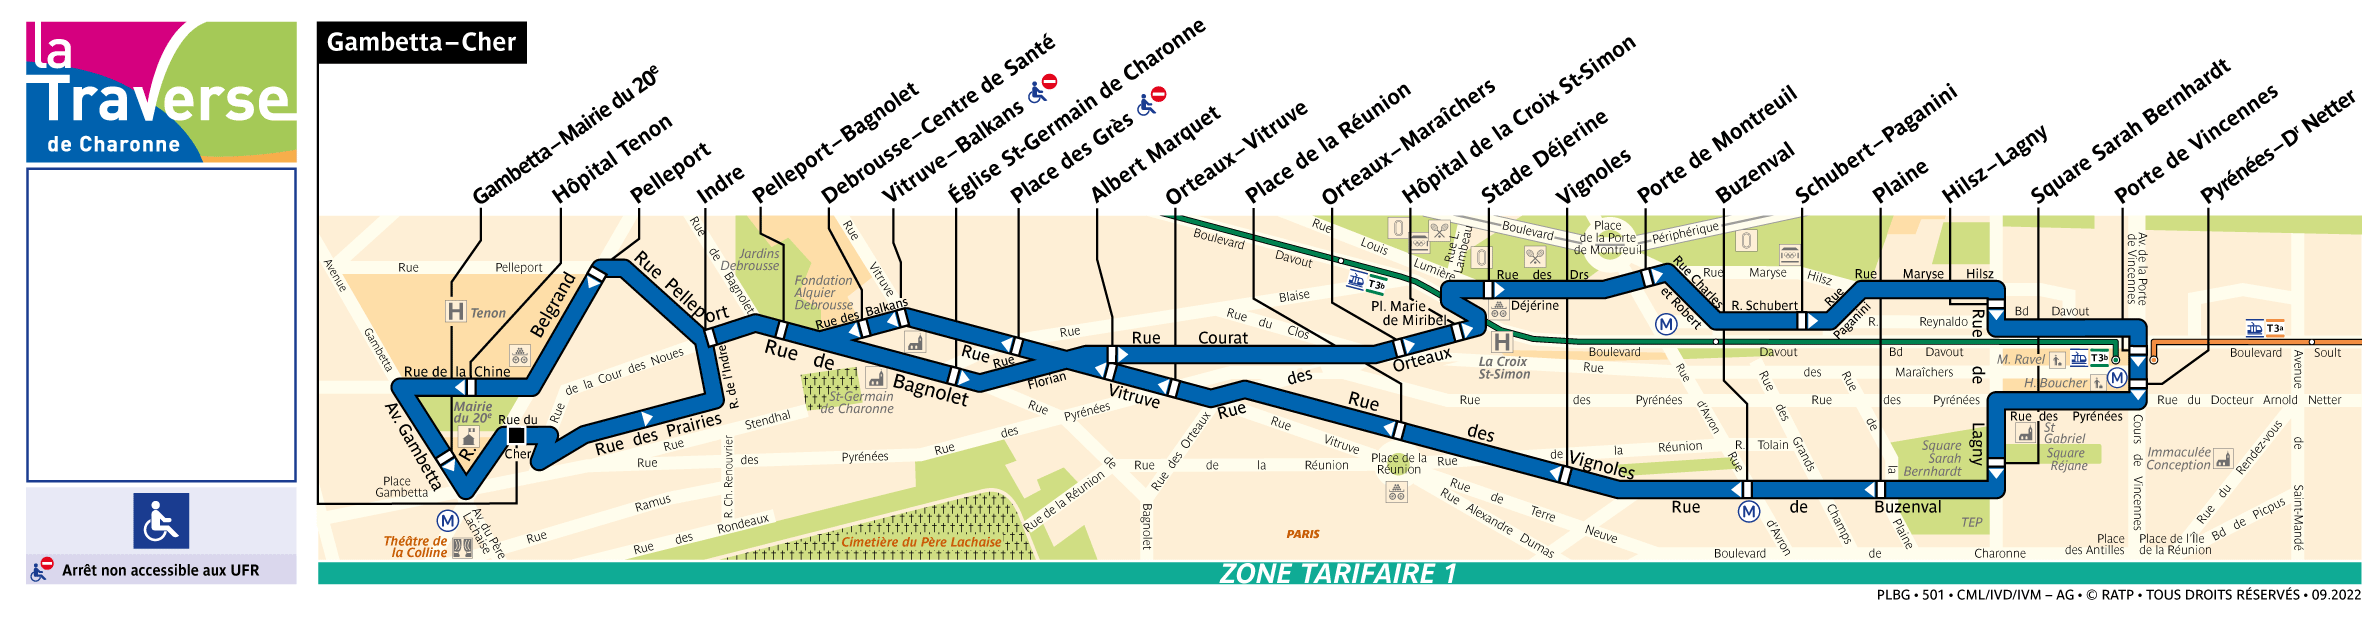 Bus map showing the La Traverse de Charonne bus route. It is a circular route, but squashed into a rectangular map